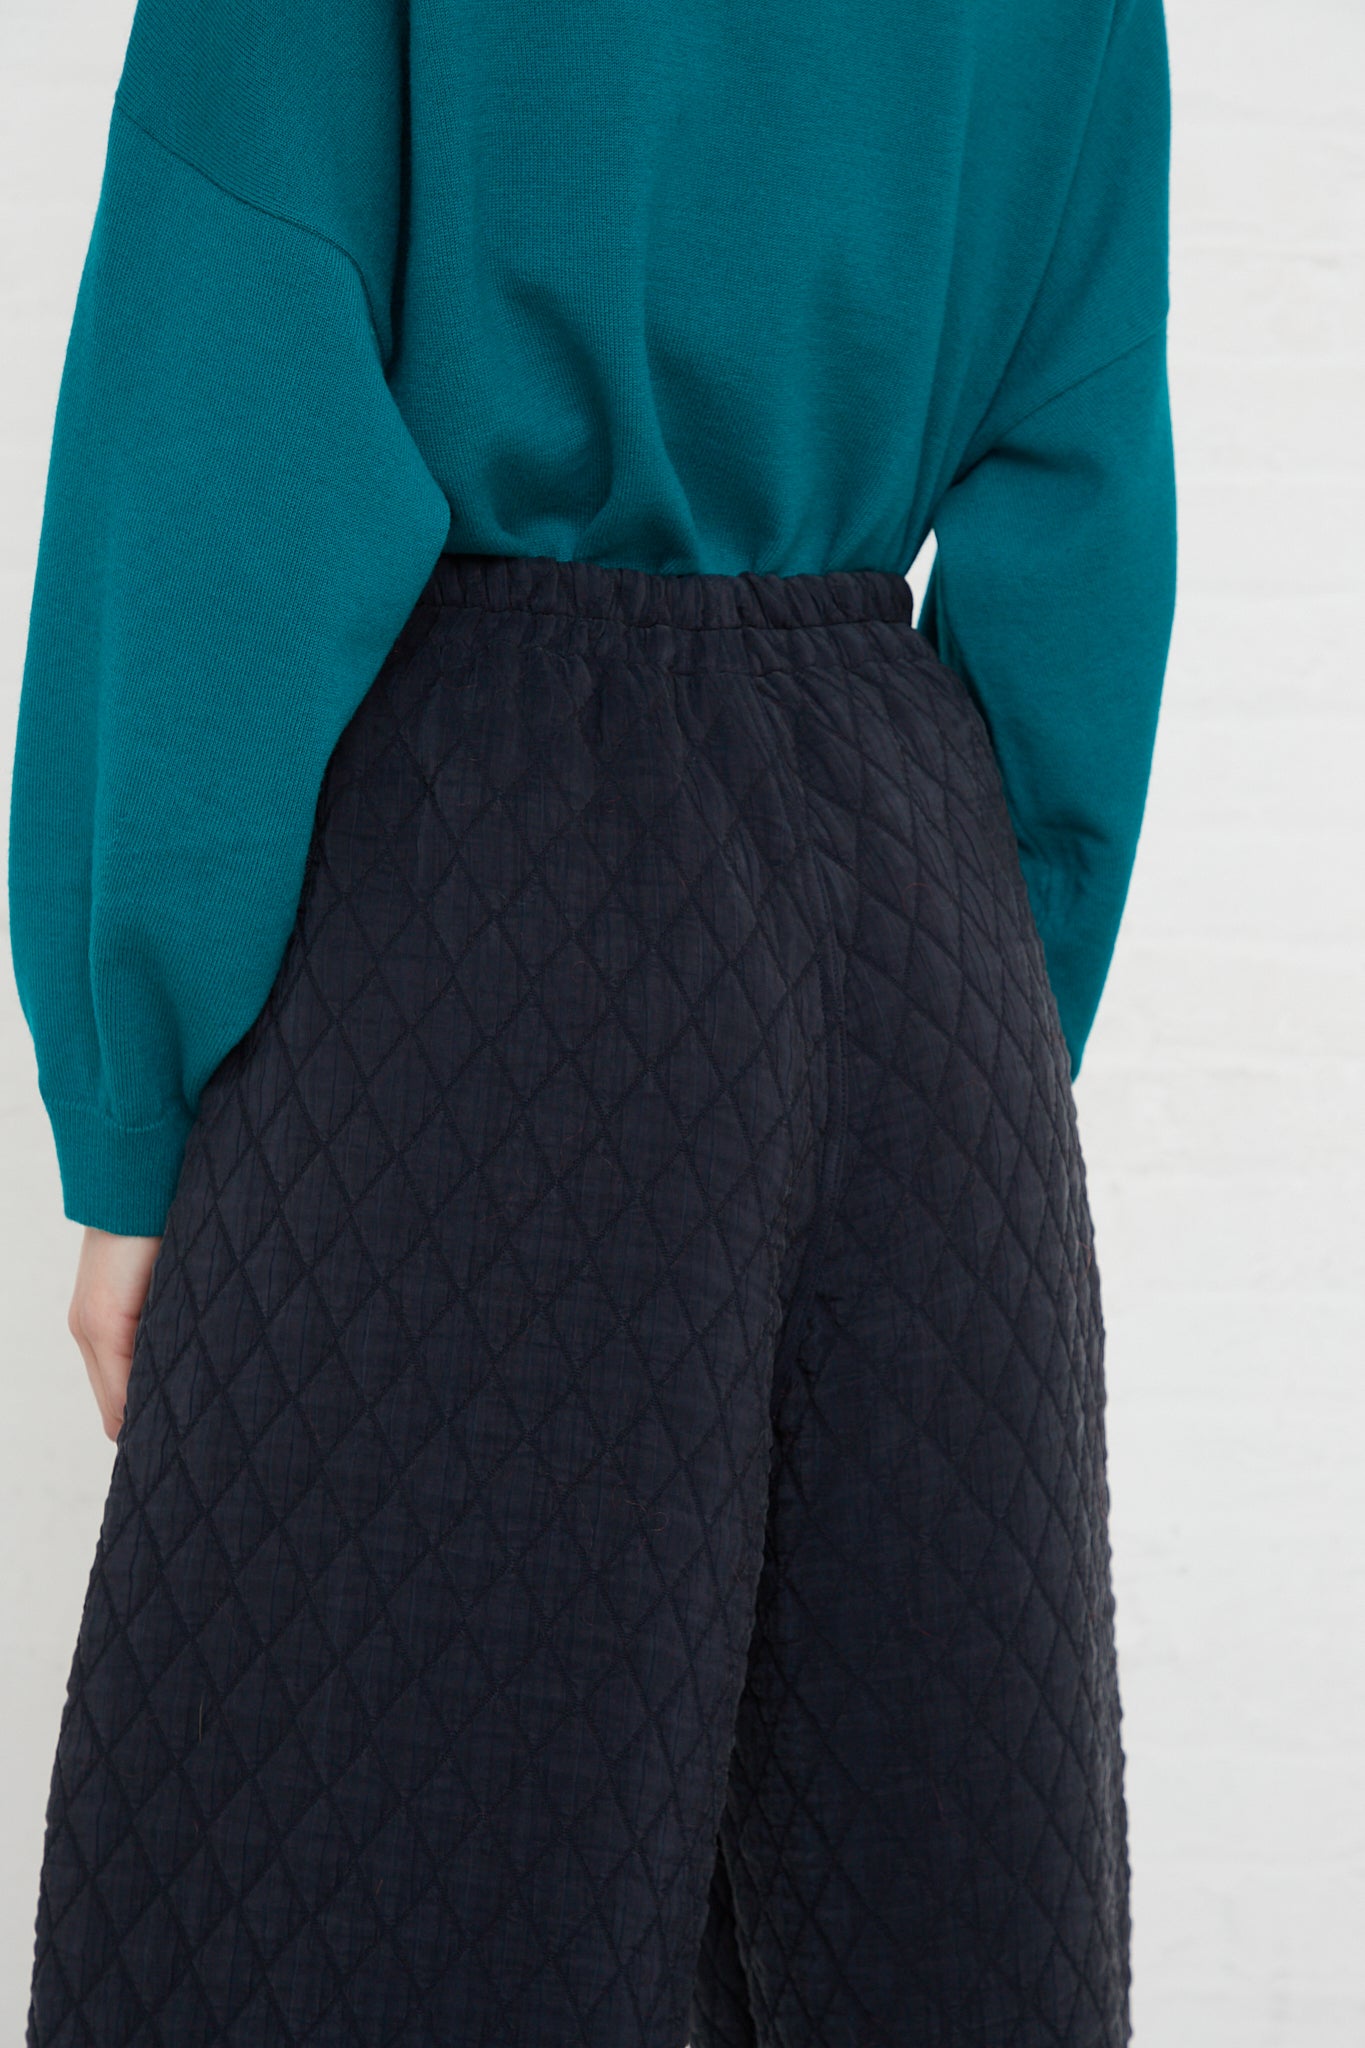 The back view of a woman wearing a teal sweater and Cordera's Quilted Curved Pant in Black with a high rise waist.